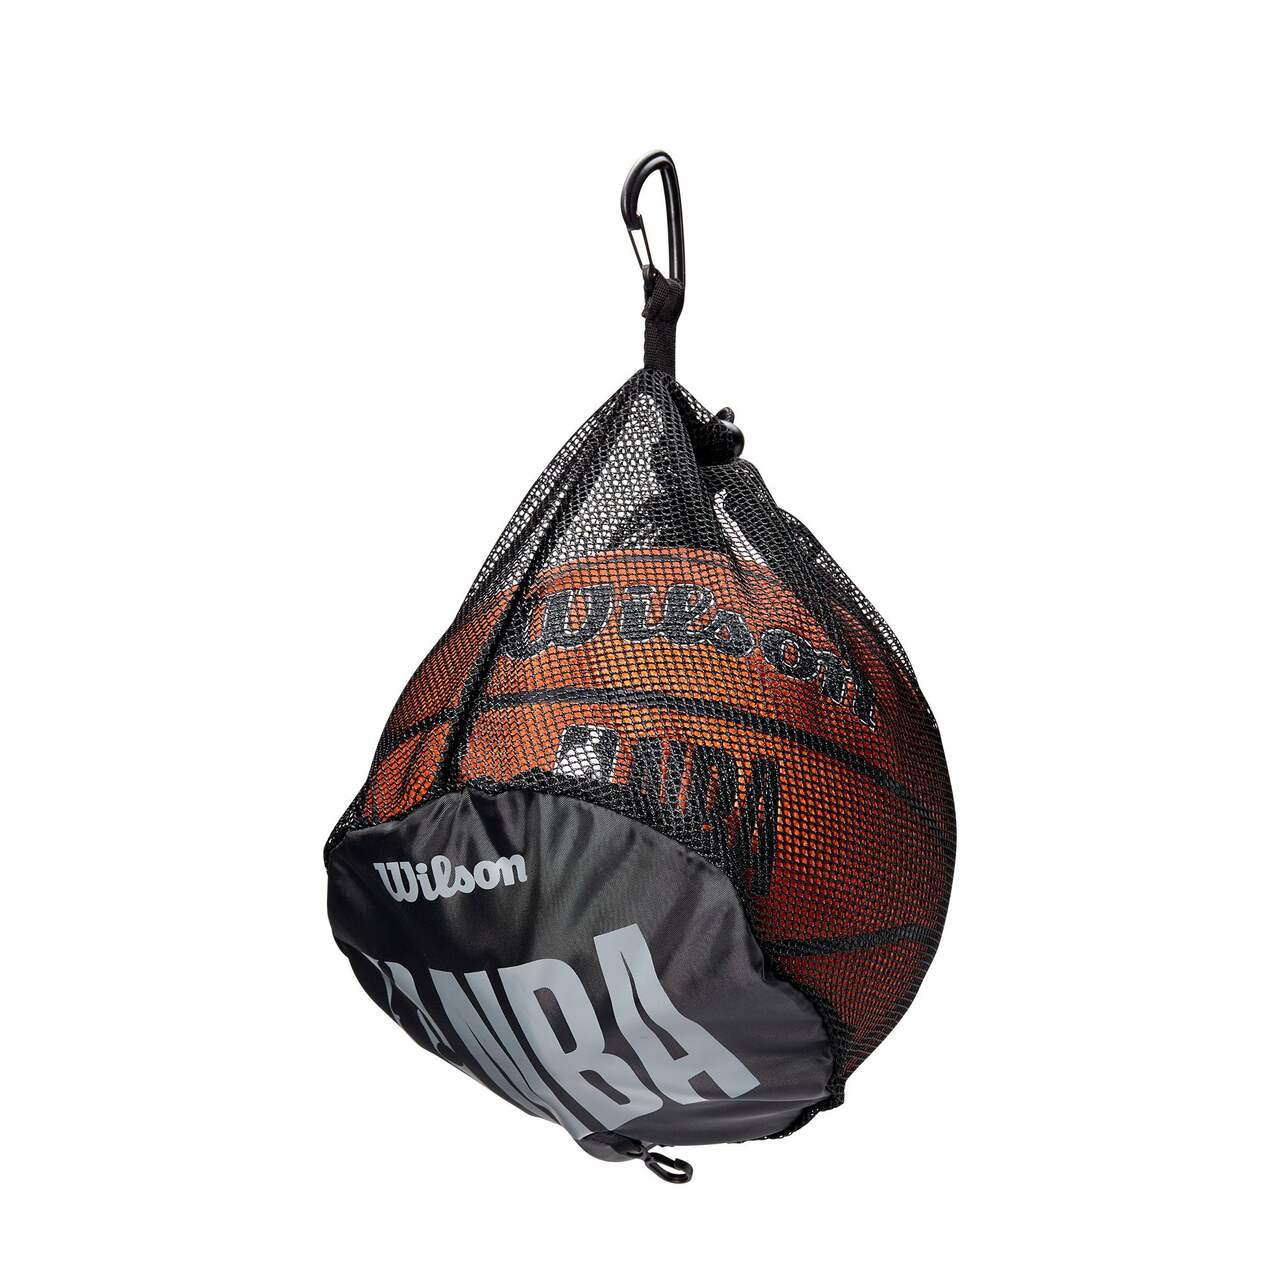 https://media-www.canadiantire.ca/product/playing/team-sports-and-golf/sports-equipment-accessories/1840850/wilson-single-ball-bag-1c2585b0-dcd3-42d6-b1a7-dd1e253e1517-jpgrendition.jpg?imdensity=1&imwidth=640&impolicy=mZoom